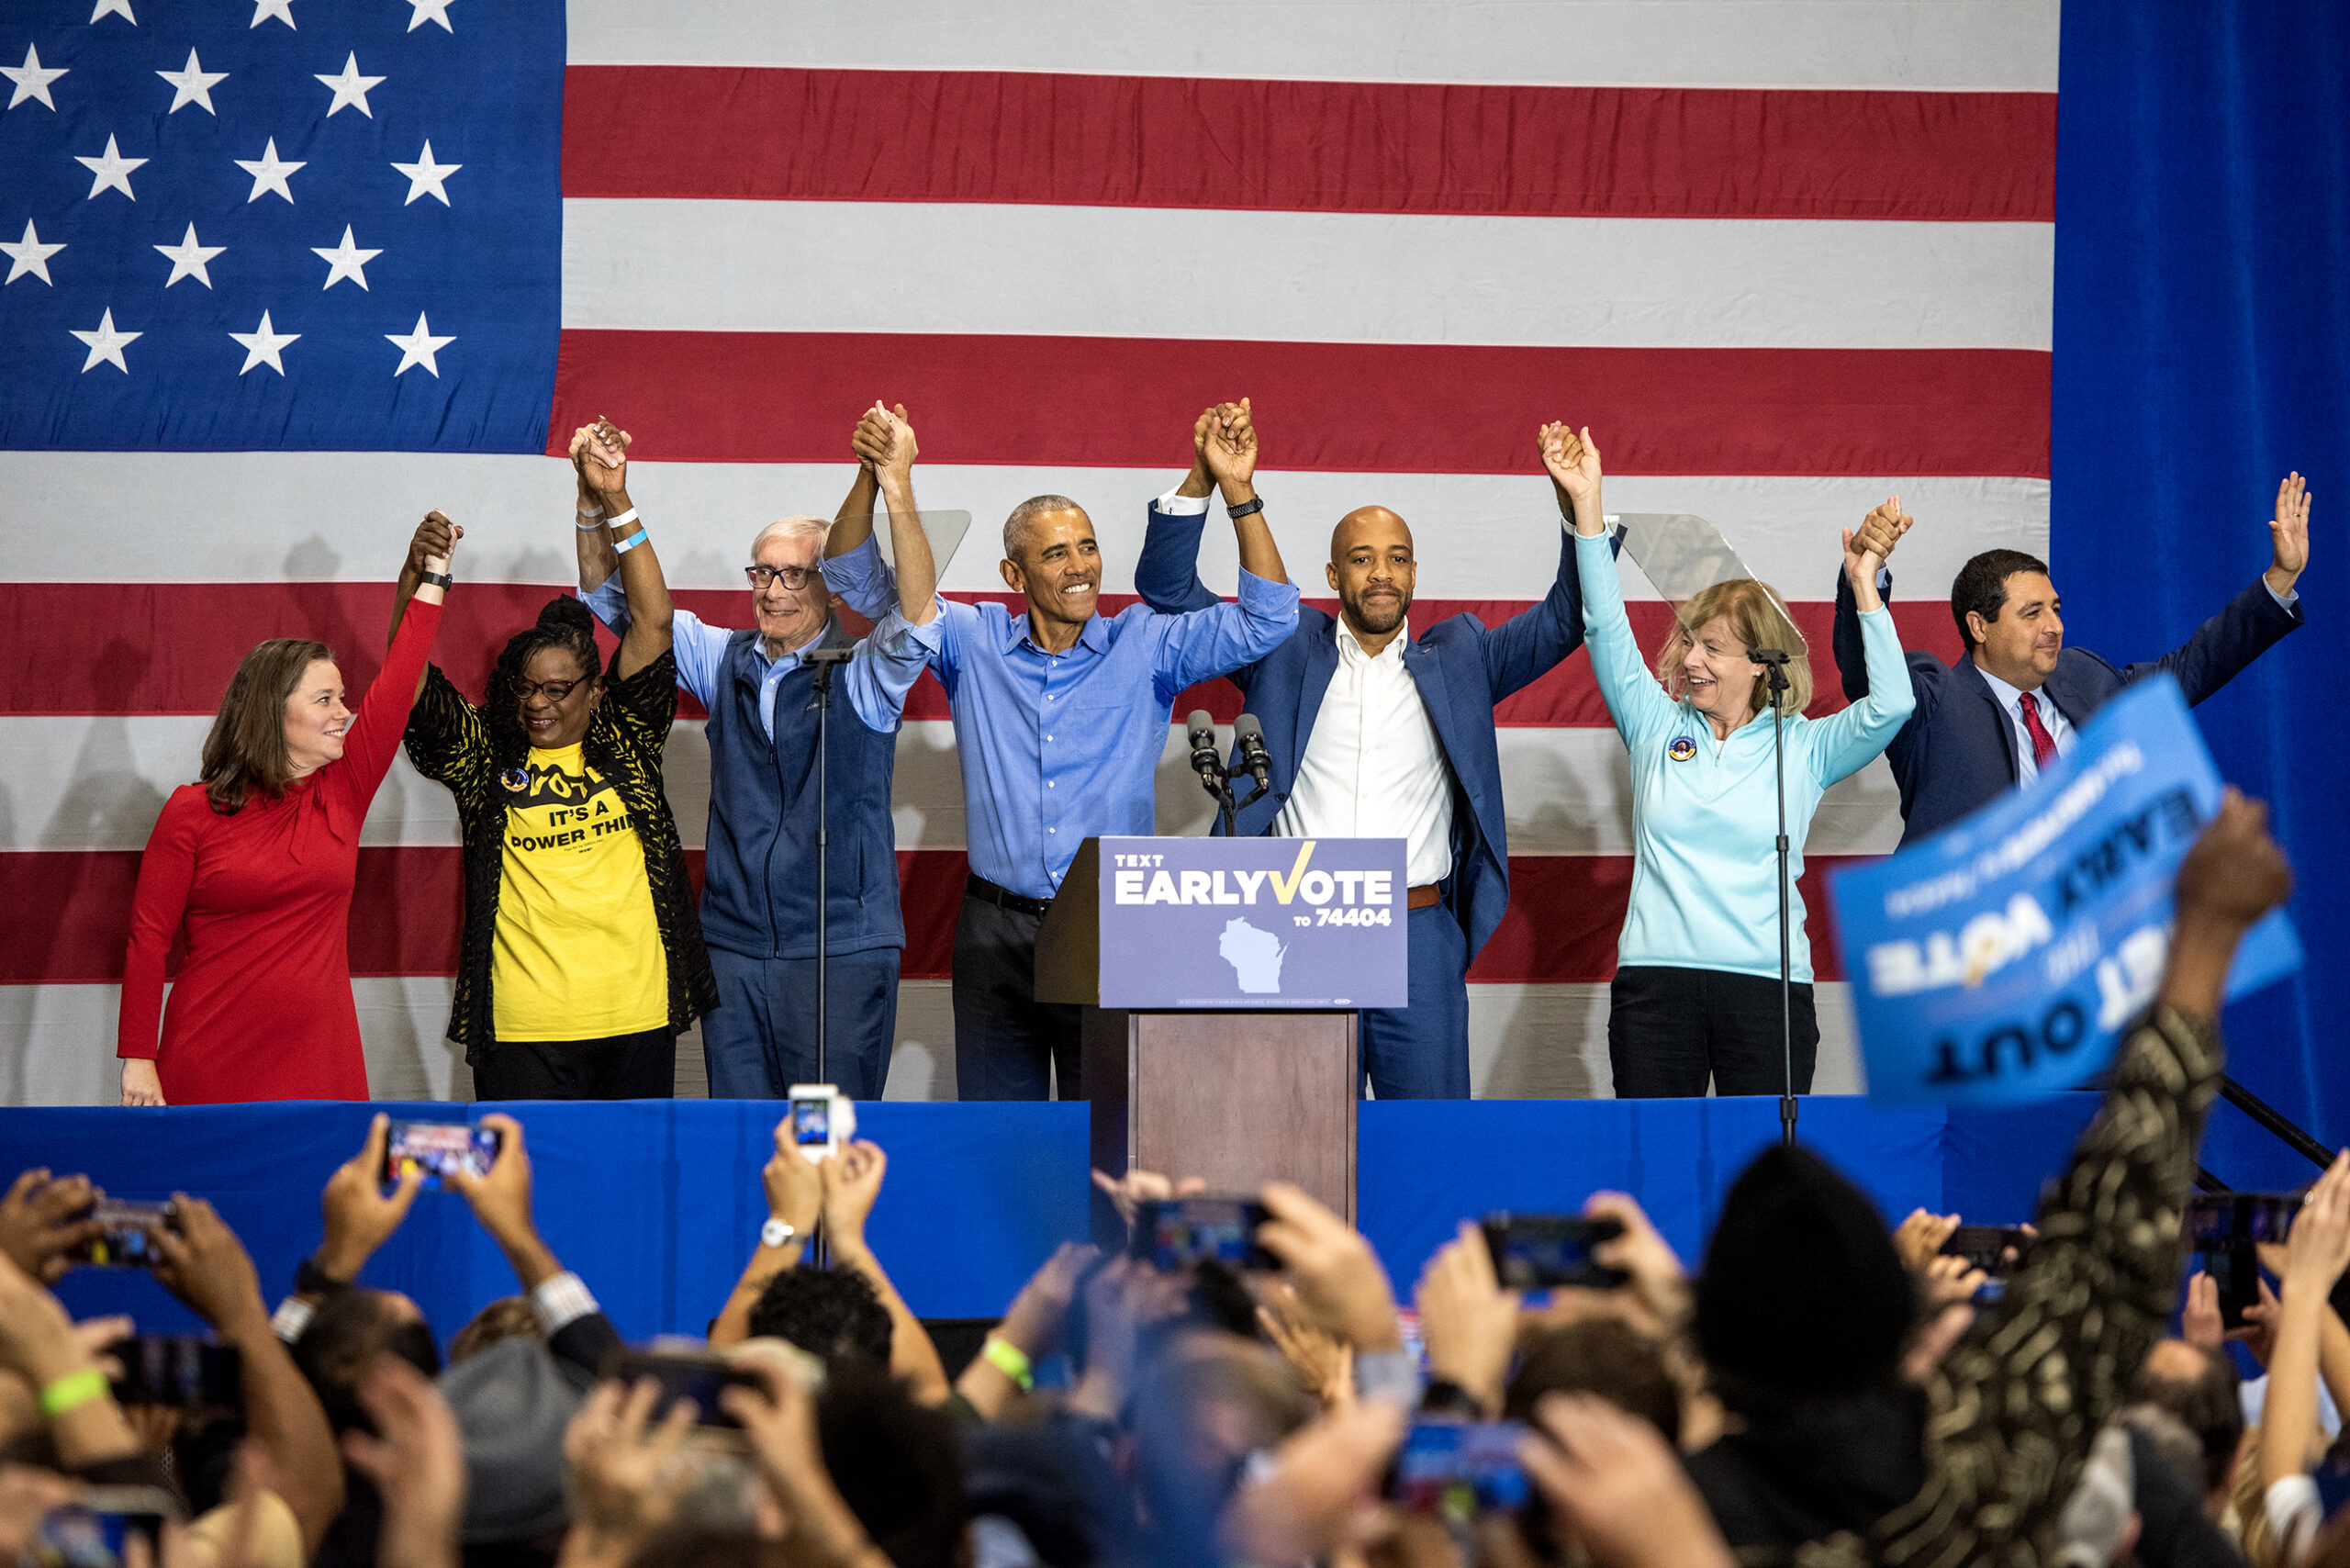 Former President Barack Obama joins hands on stage with Democratic candidates for office.